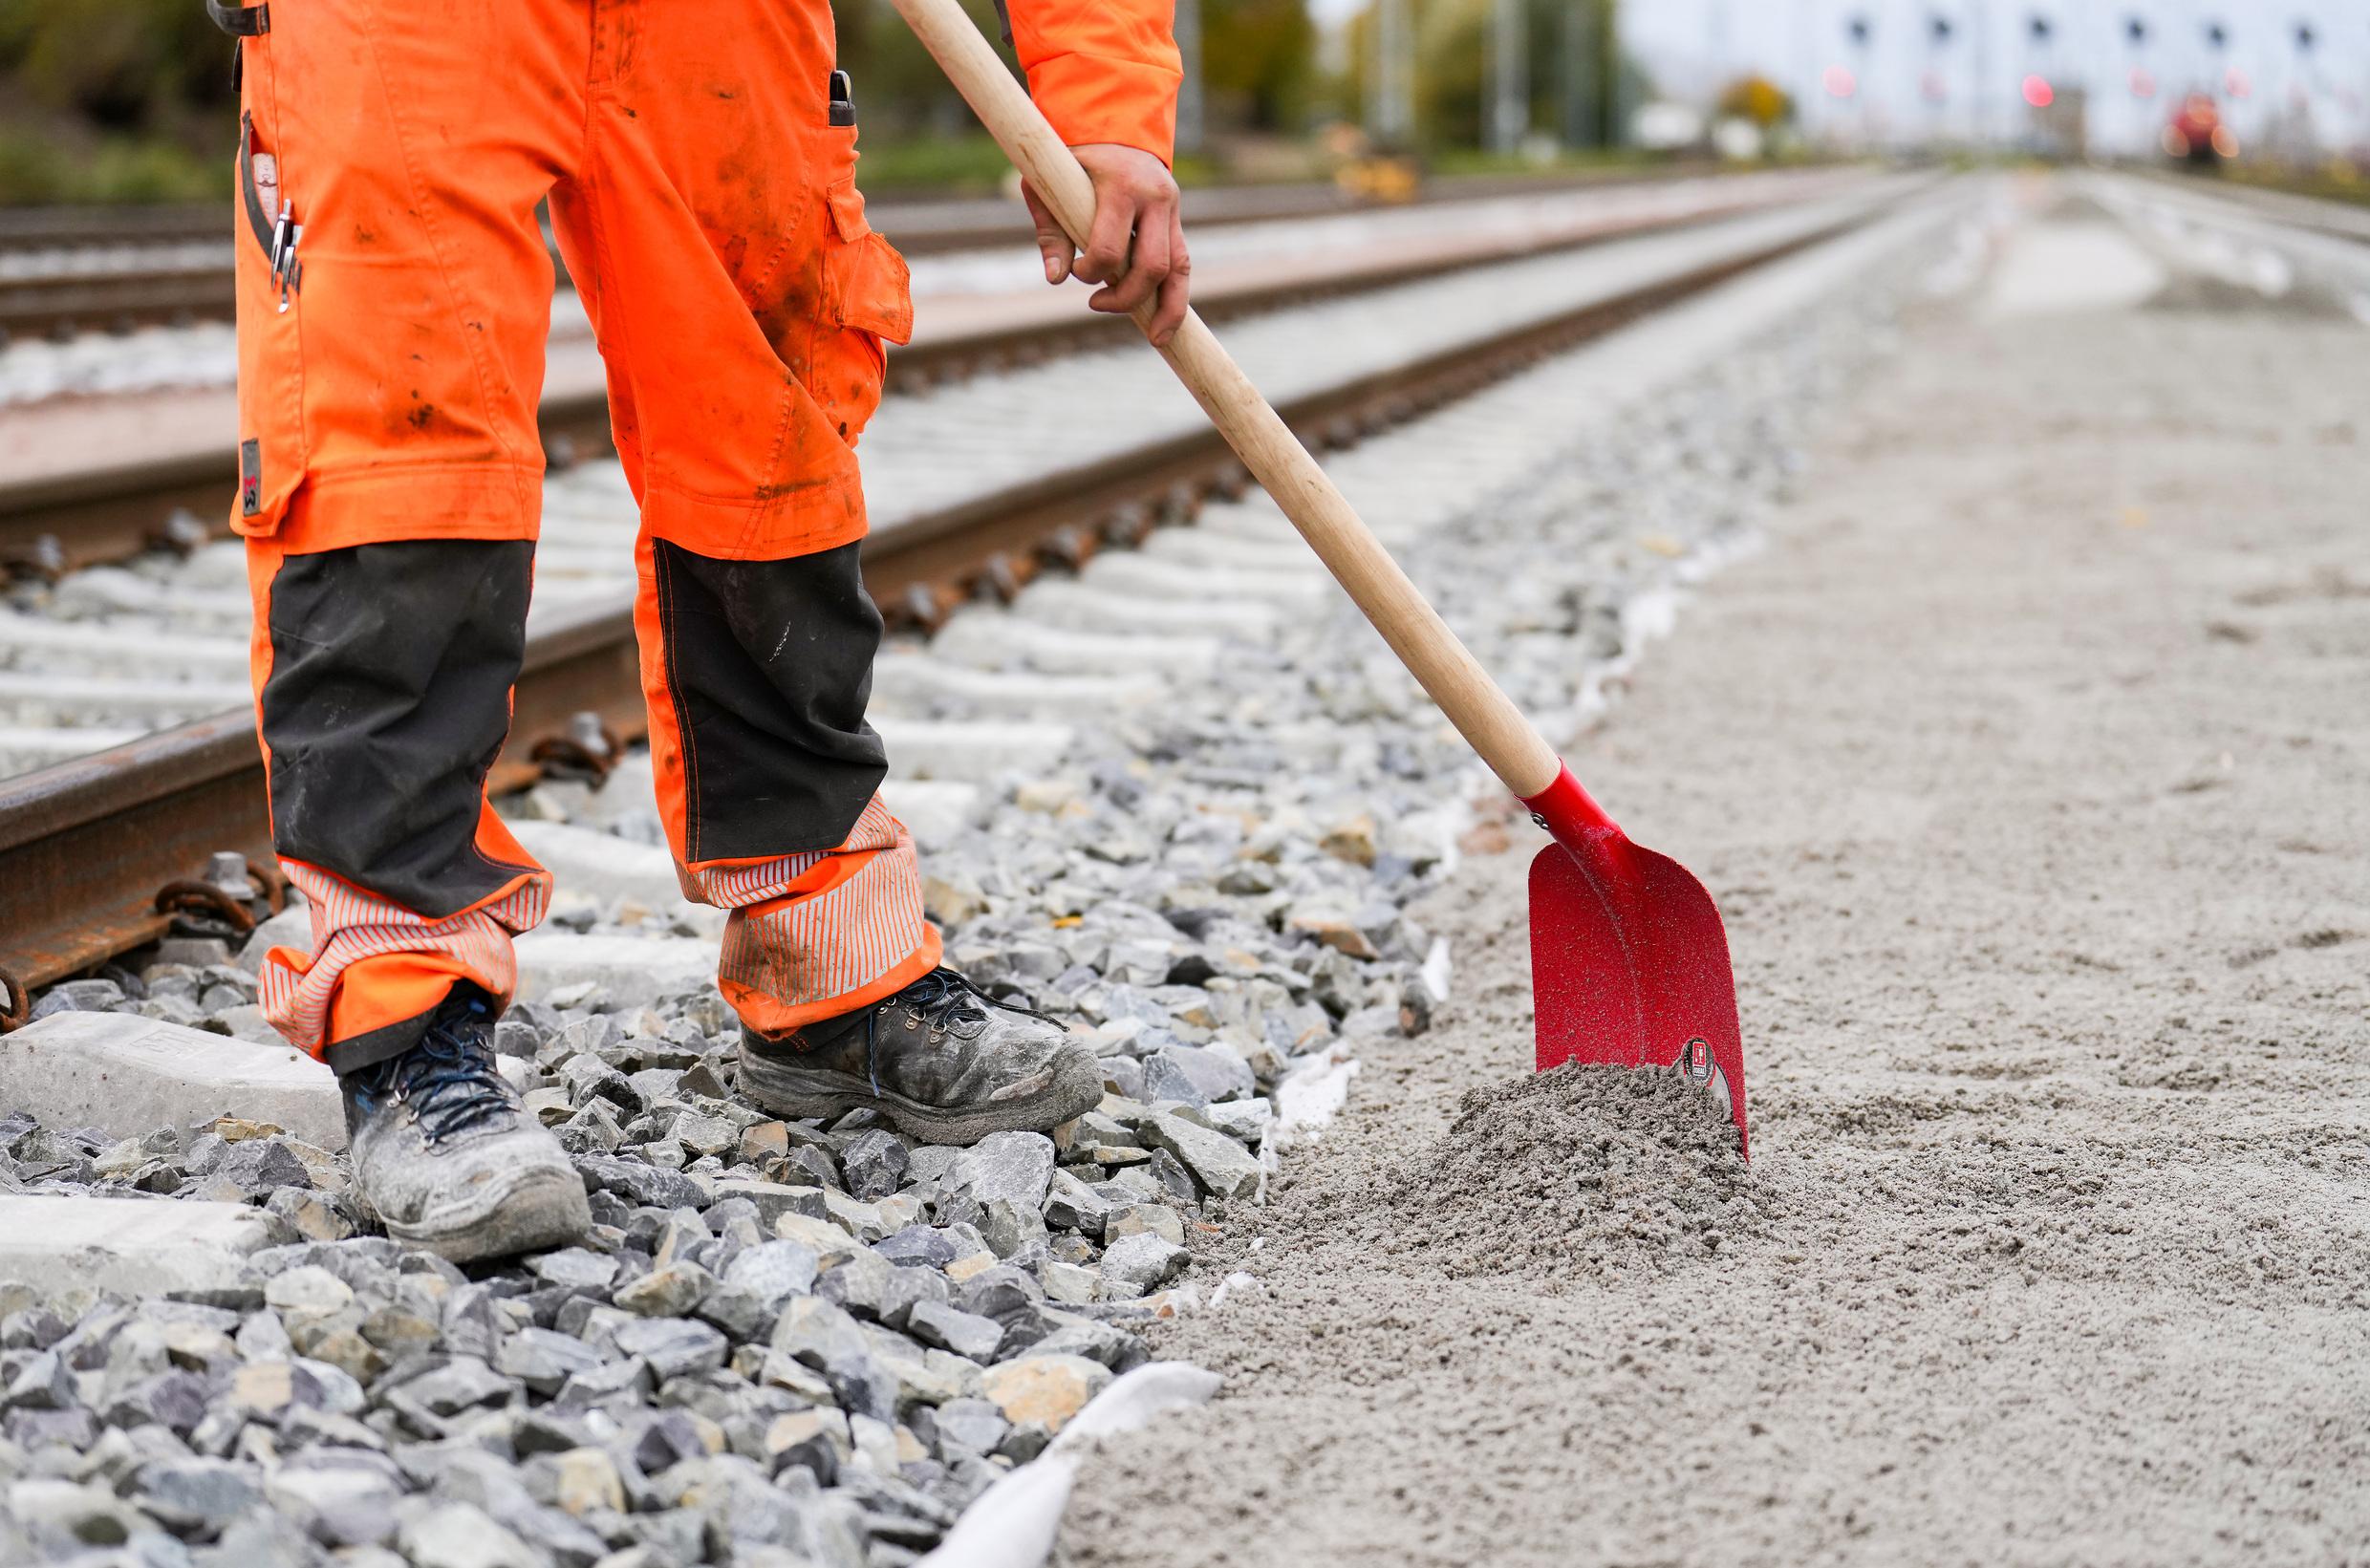 A construction worker works on the ground at a track bed with a shovel.